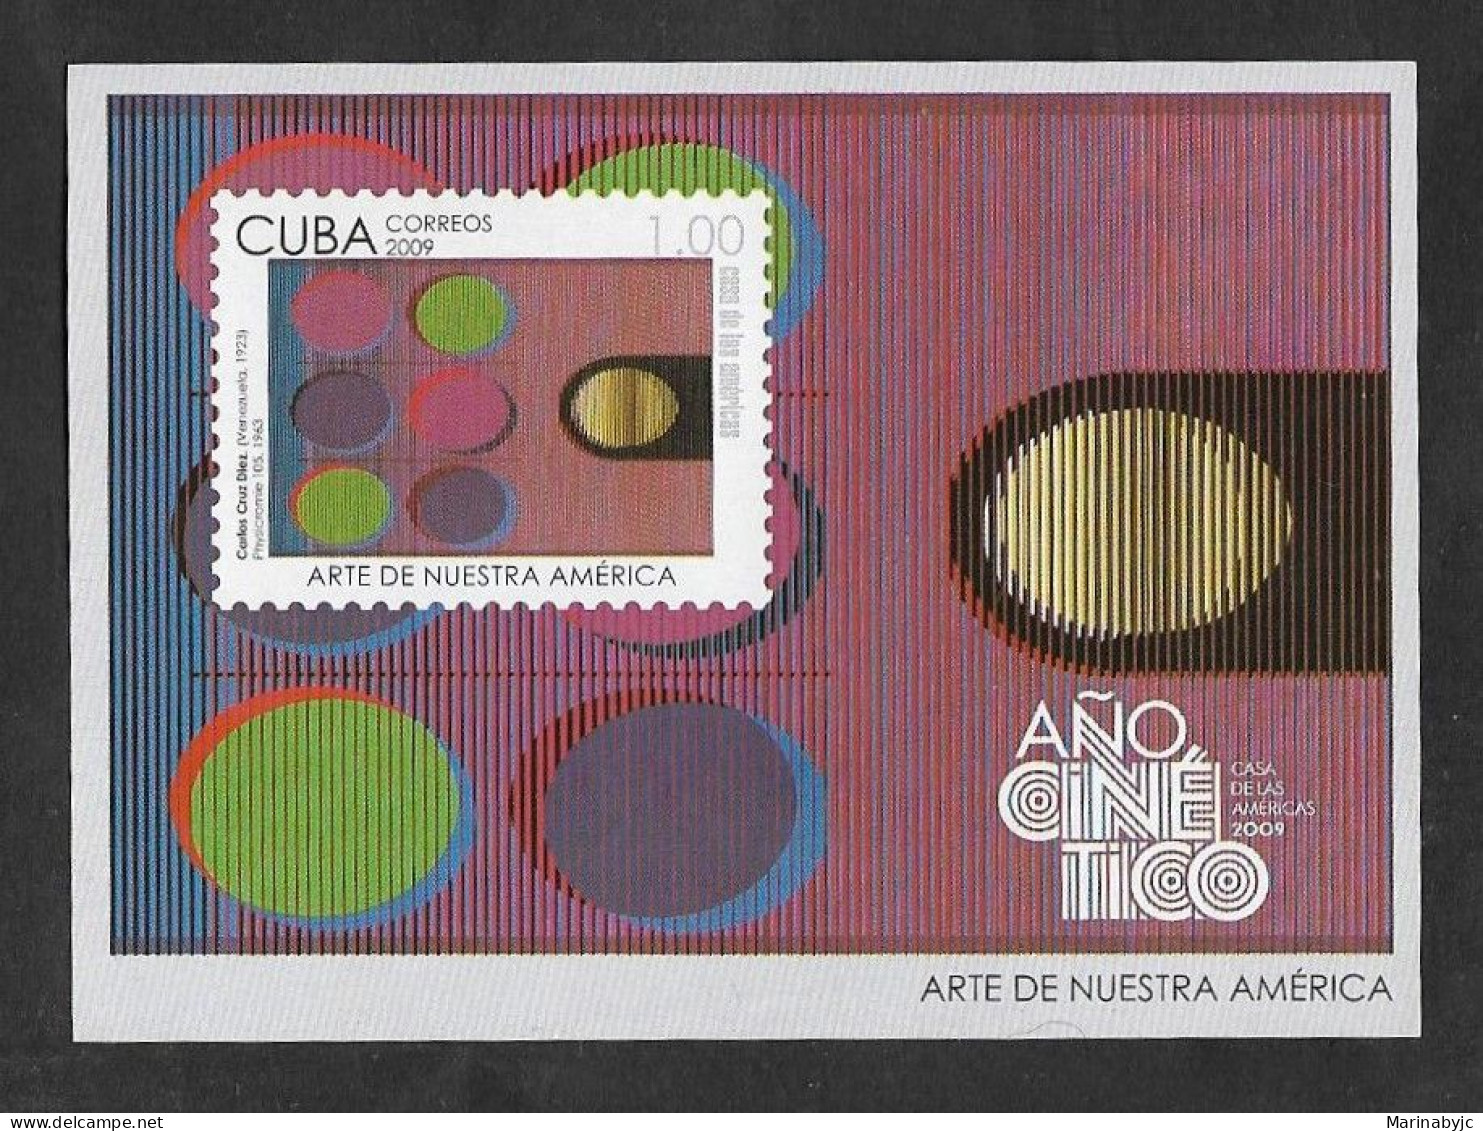 SE)2009 CUBA, FROM THE CINETIC ART SERIES, HOUSE OF THE AMERICAS, SS, MNH - Oblitérés